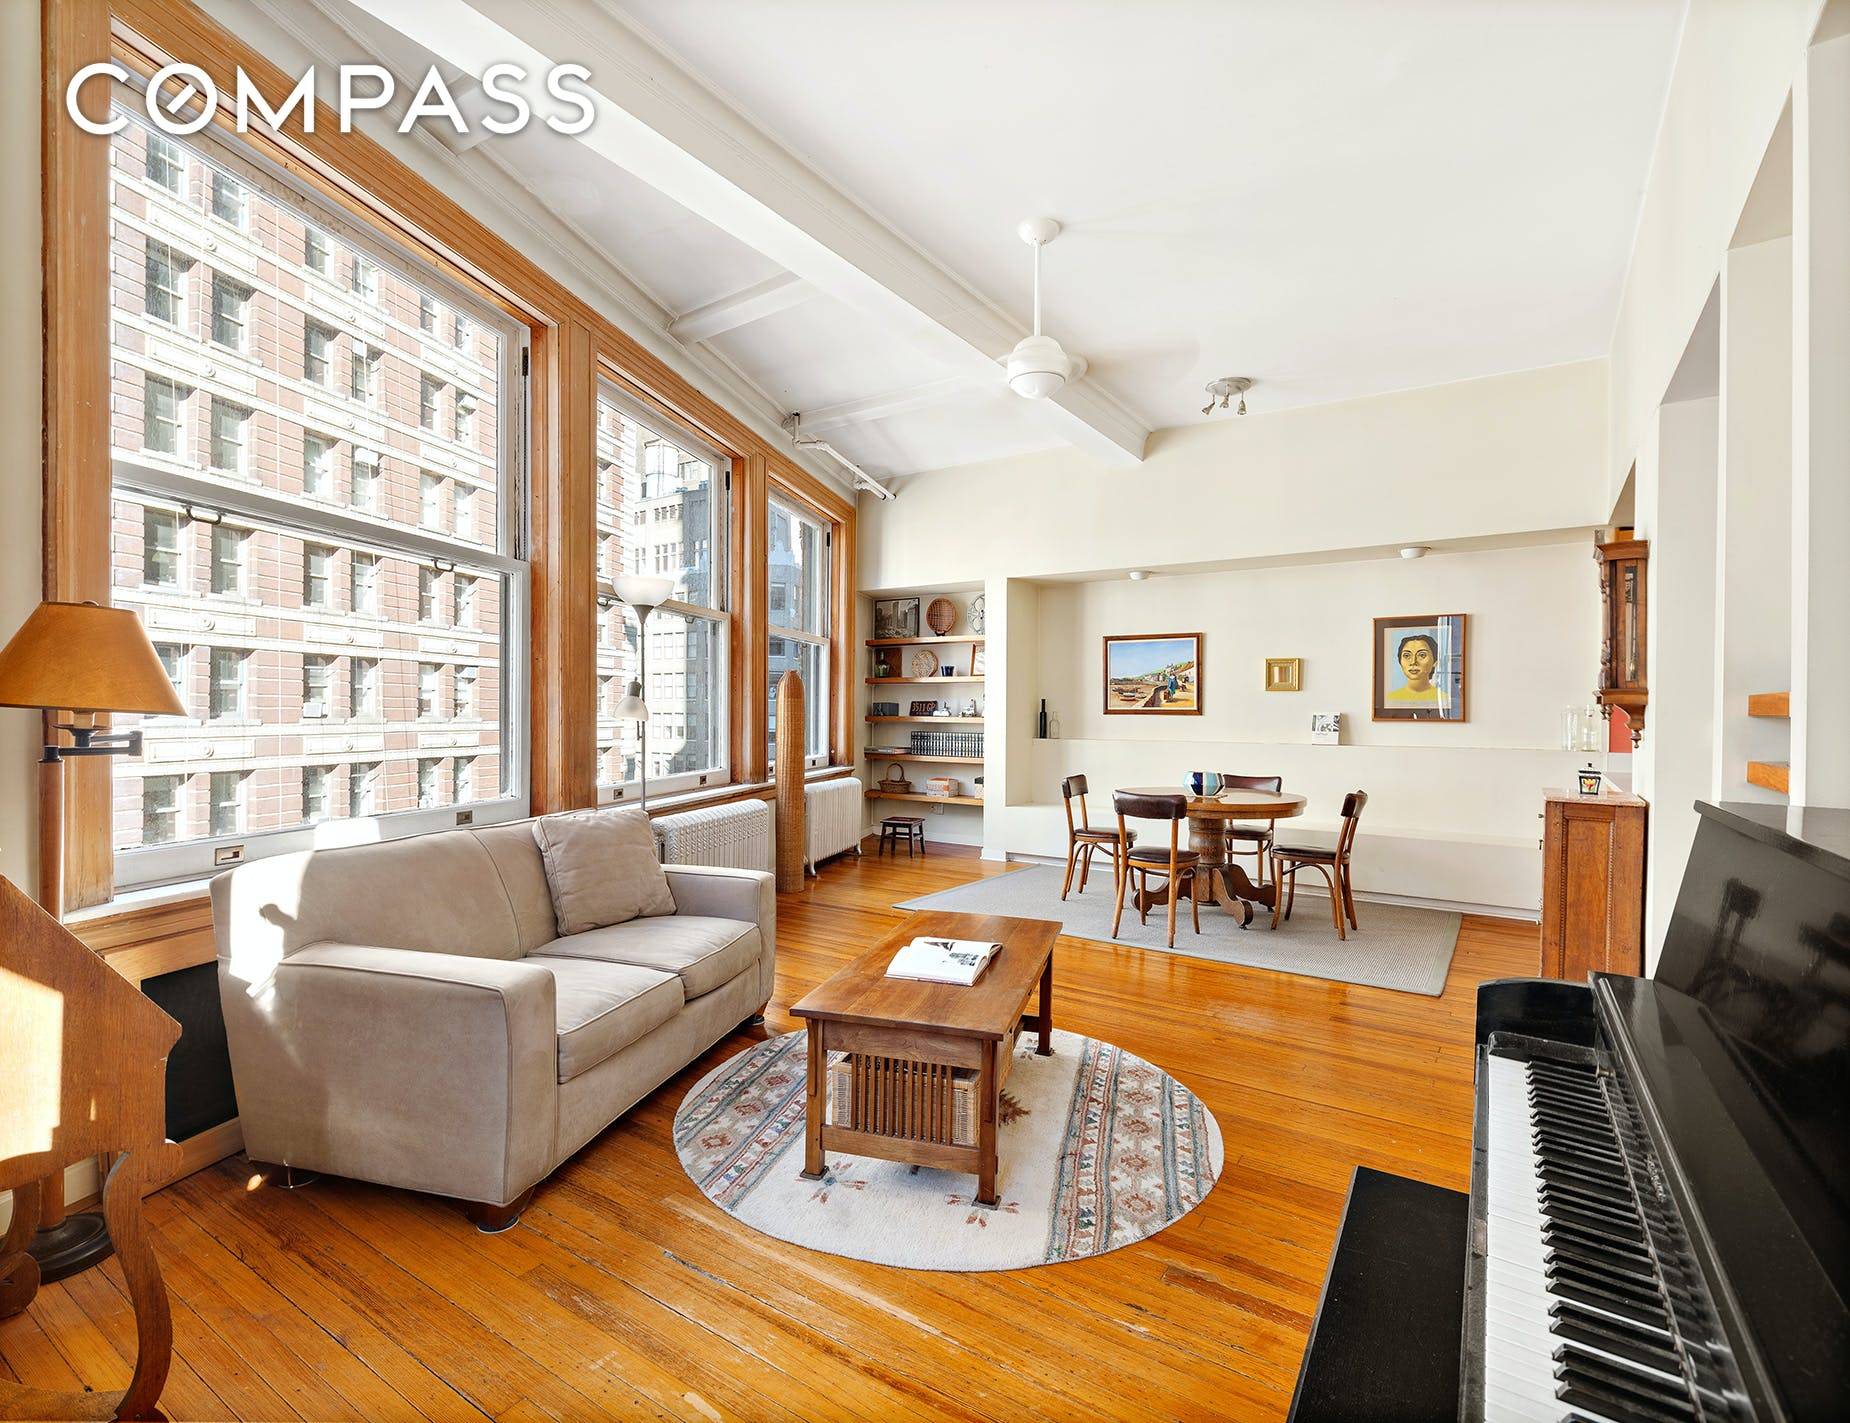 Residence 6W at 208 Fifth Avenue is a classic pre war loft with high ceilings, massive western and southern facing windows and a spacious open floor plan.